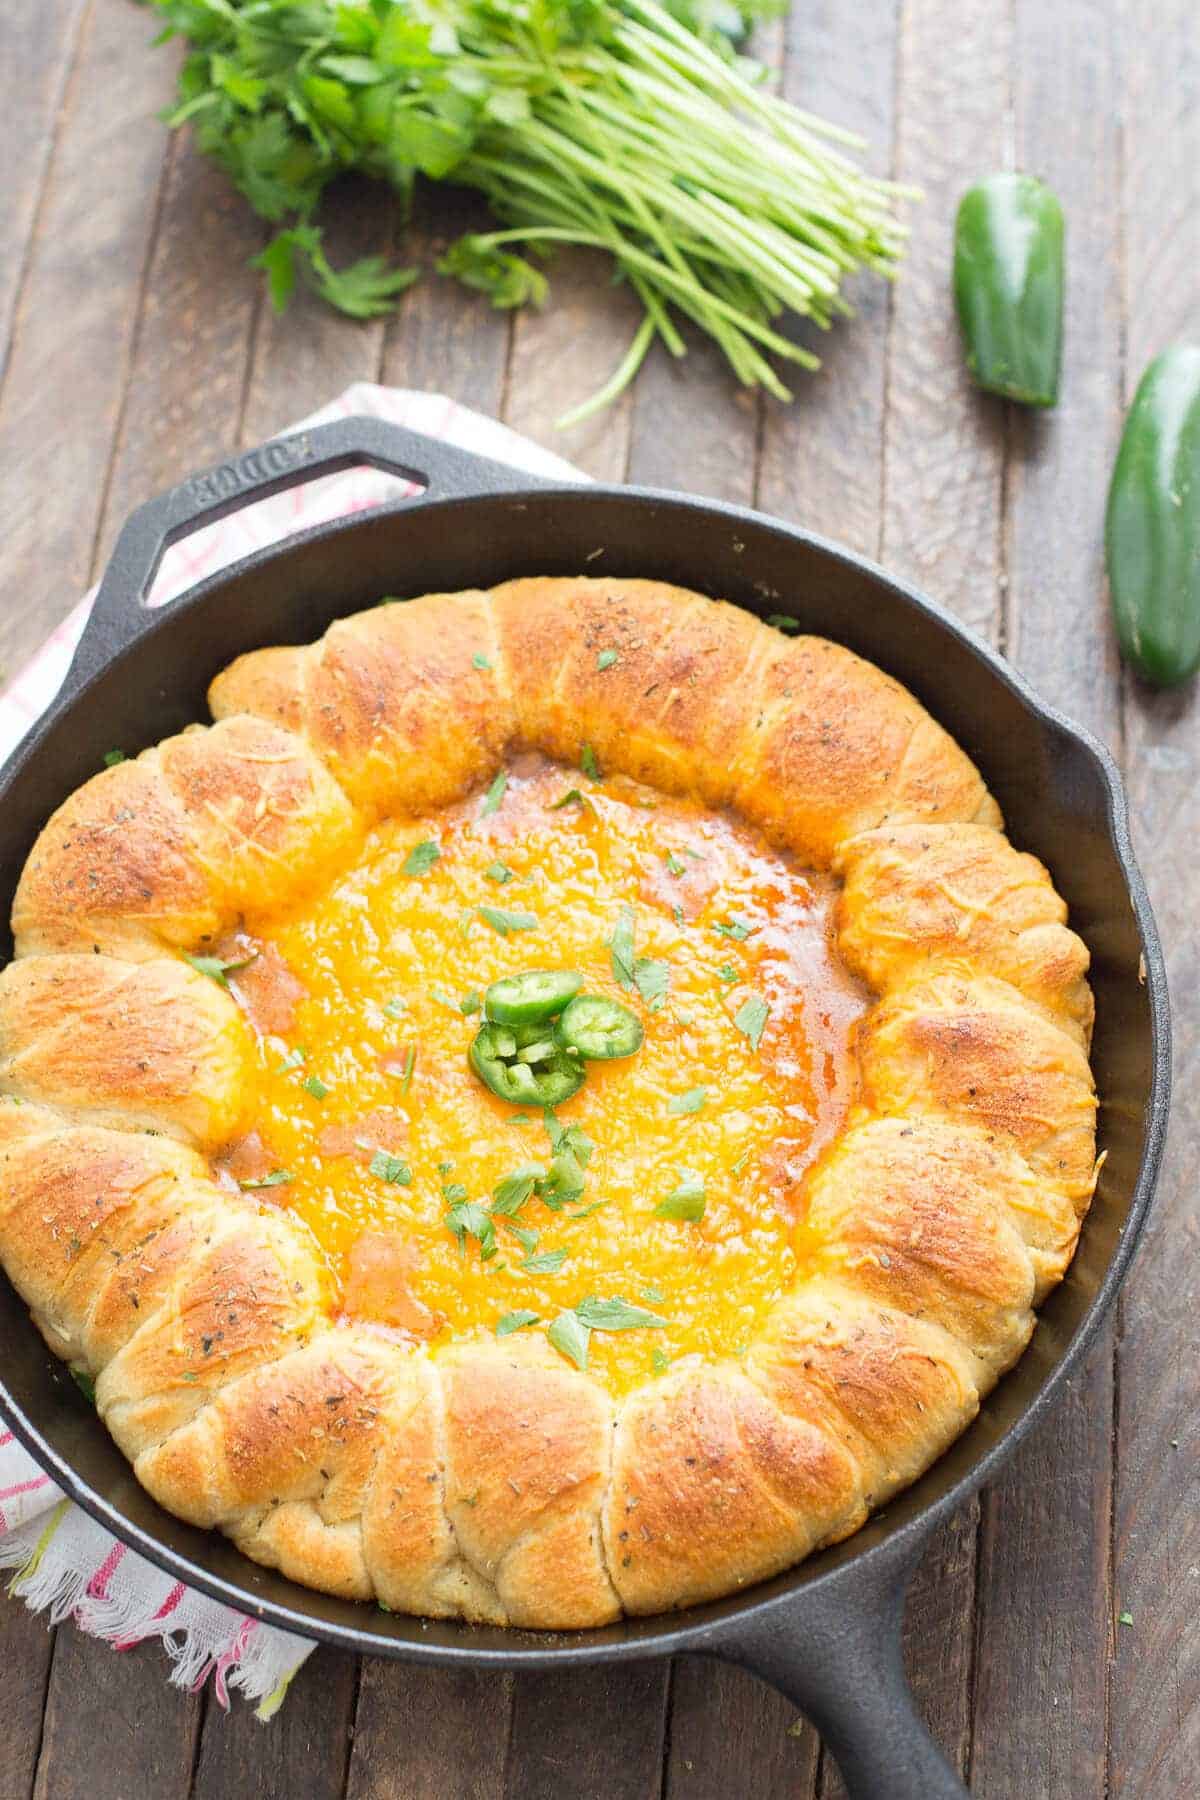 This chili cheese dip is like no other! The ring of crescent roll make it the best!